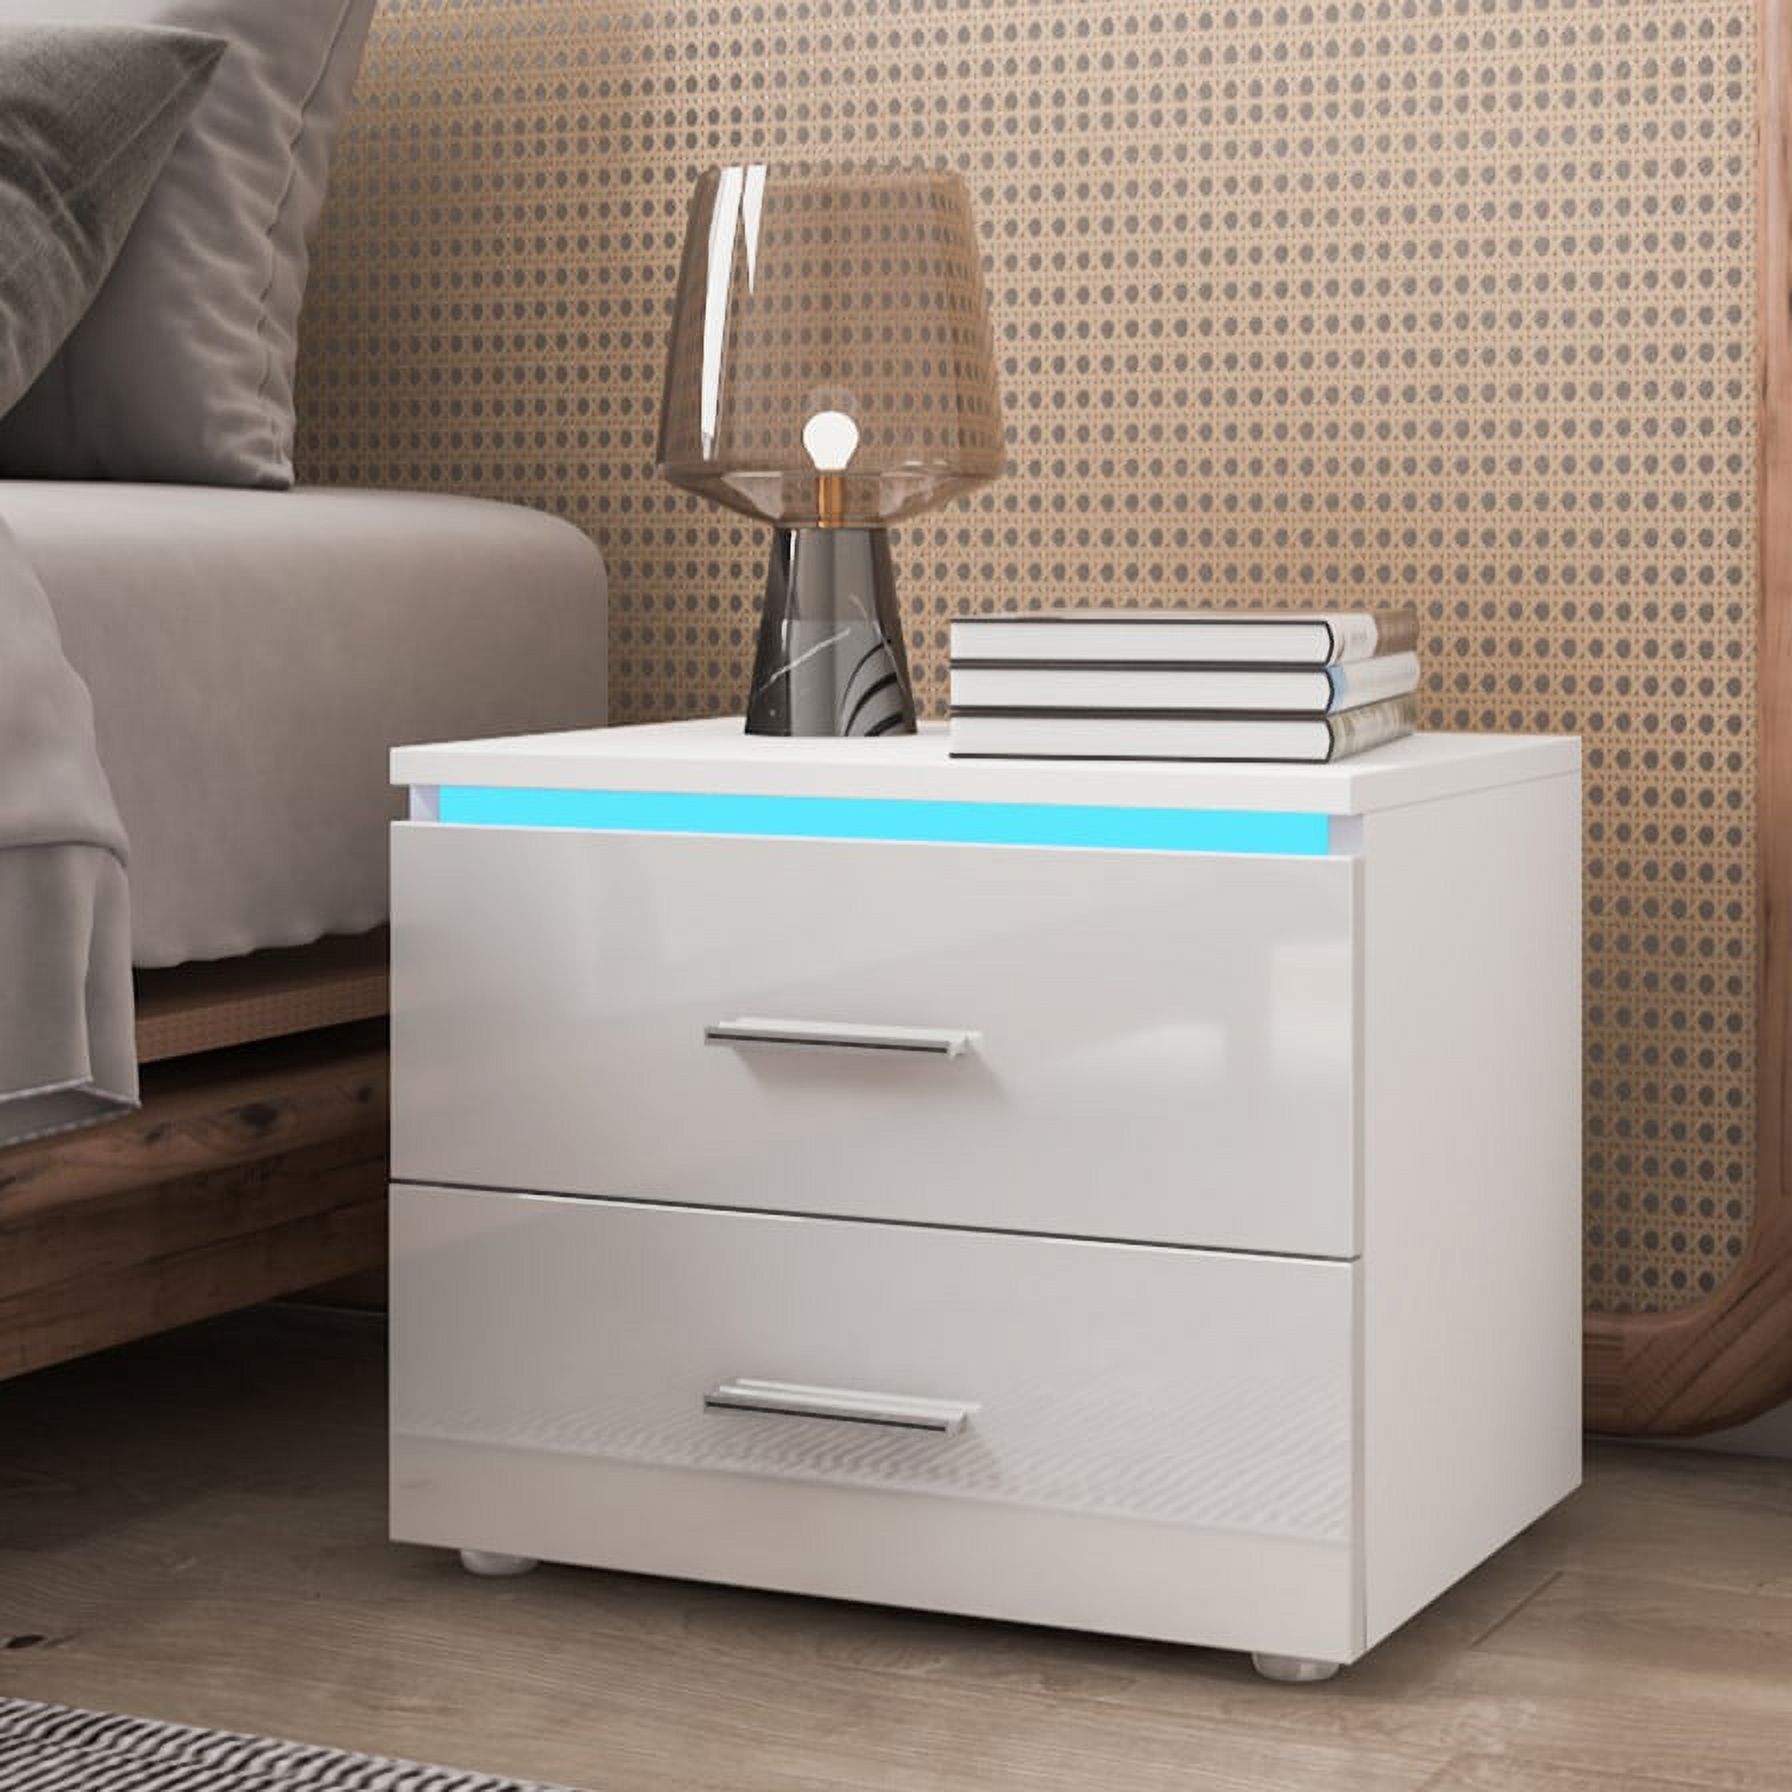 Hommpa Modern High Gloss LED Nightstand with 2 Drawers White Bedside Table with LED Light Handle Small End Side Table for Bedroom Living Room Furniture 18.9x13.8x15.4 inch - image 1 of 11